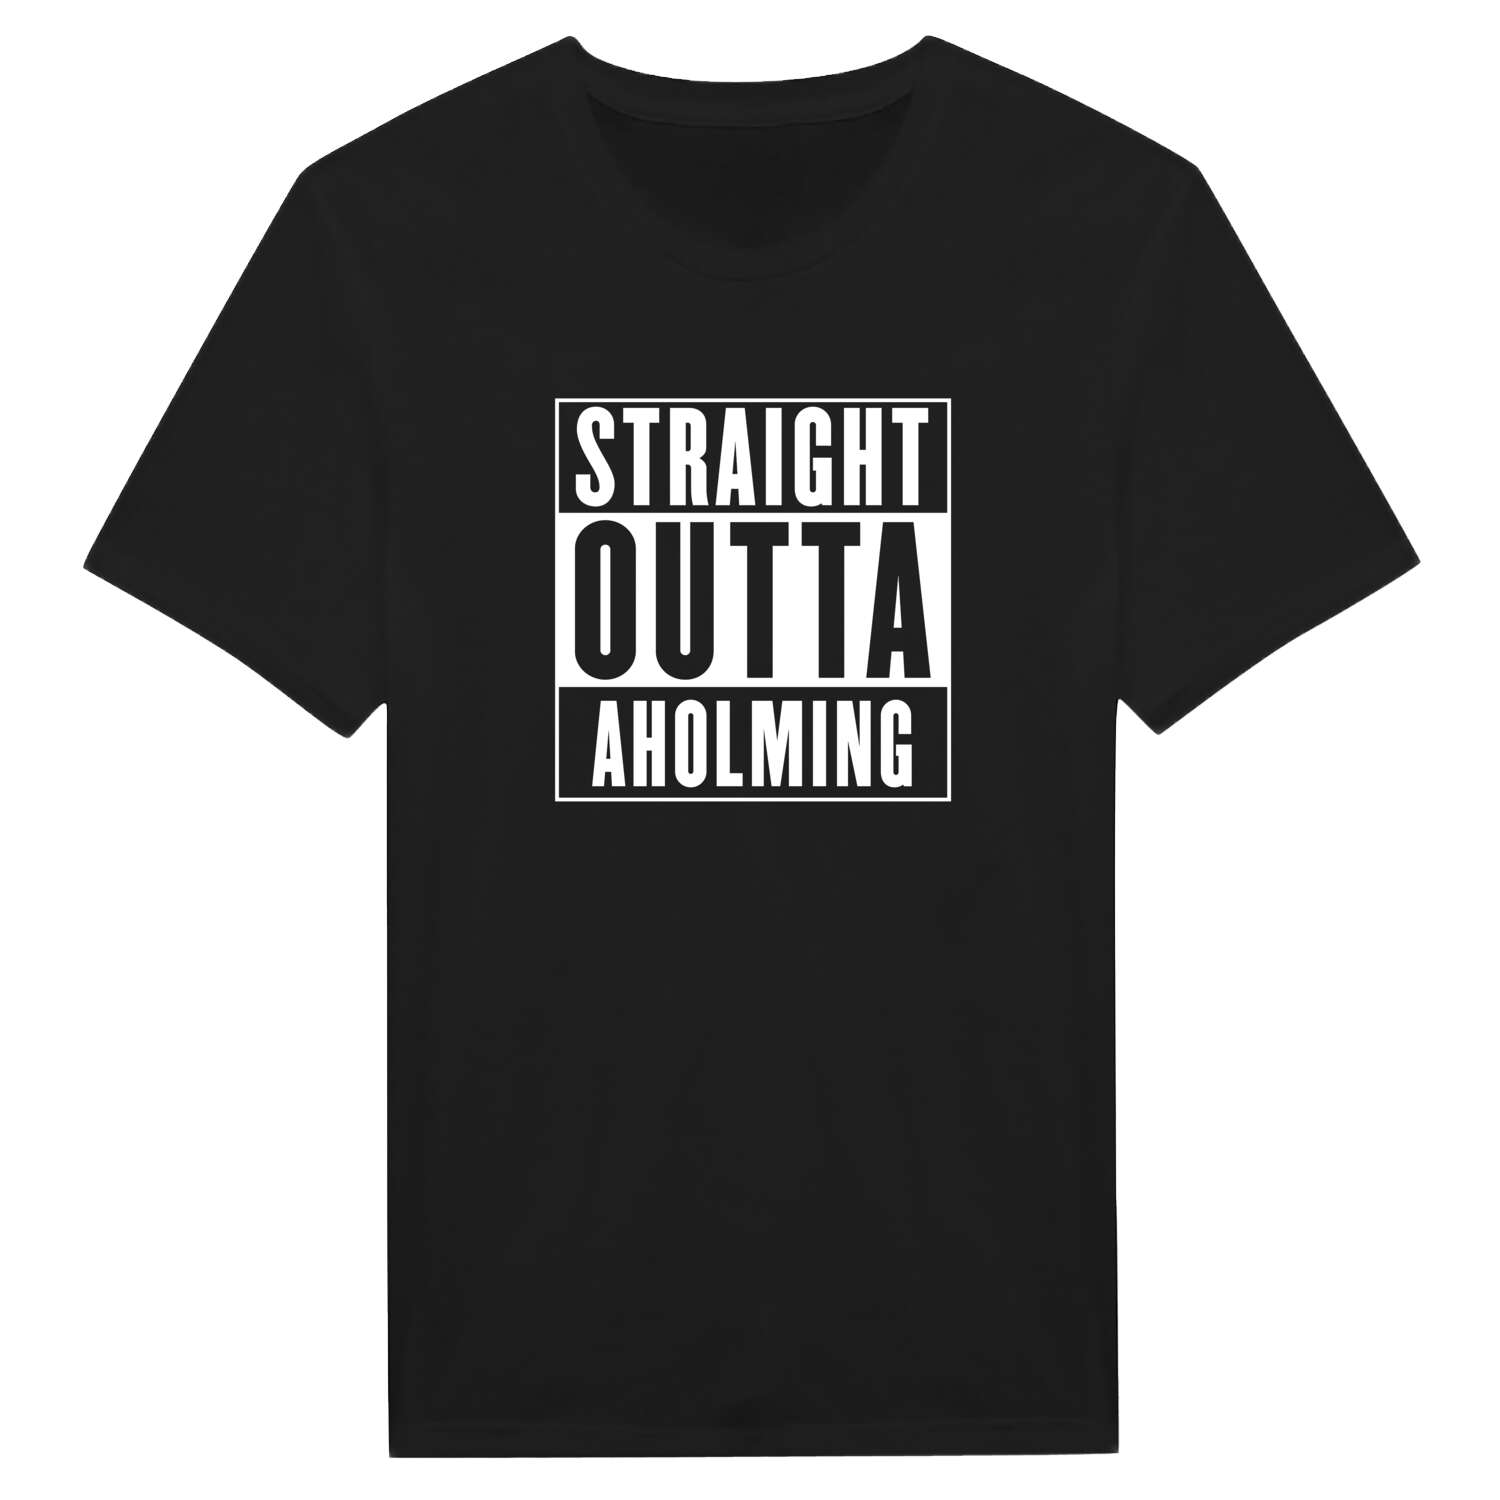 Aholming T-Shirt »Straight Outta«